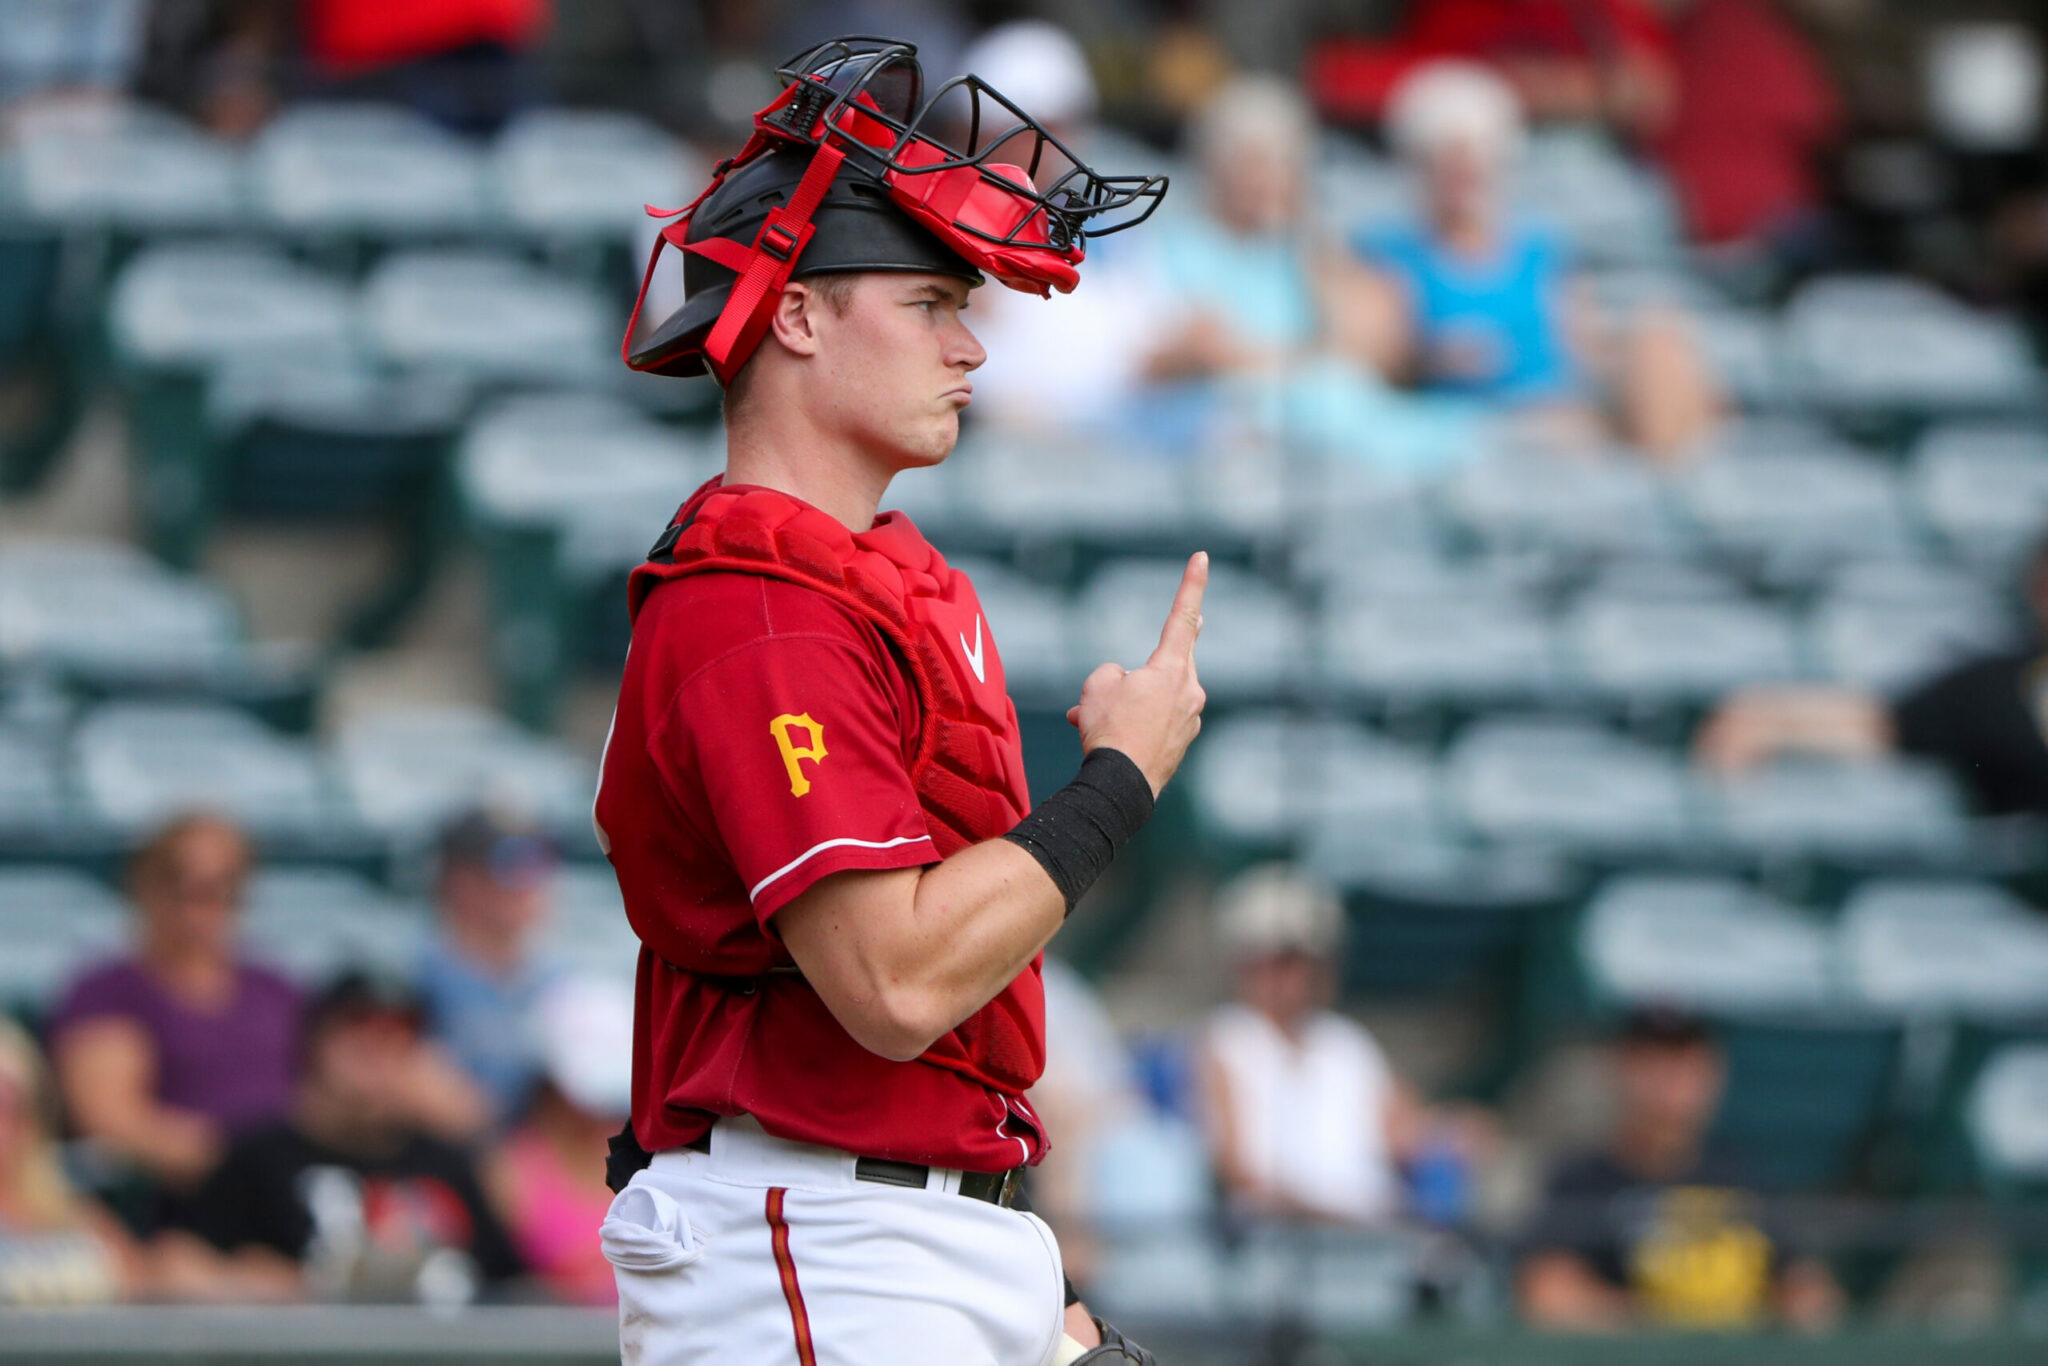 Pirates Prospects Daily: The Current Strengths Of The Pirates System